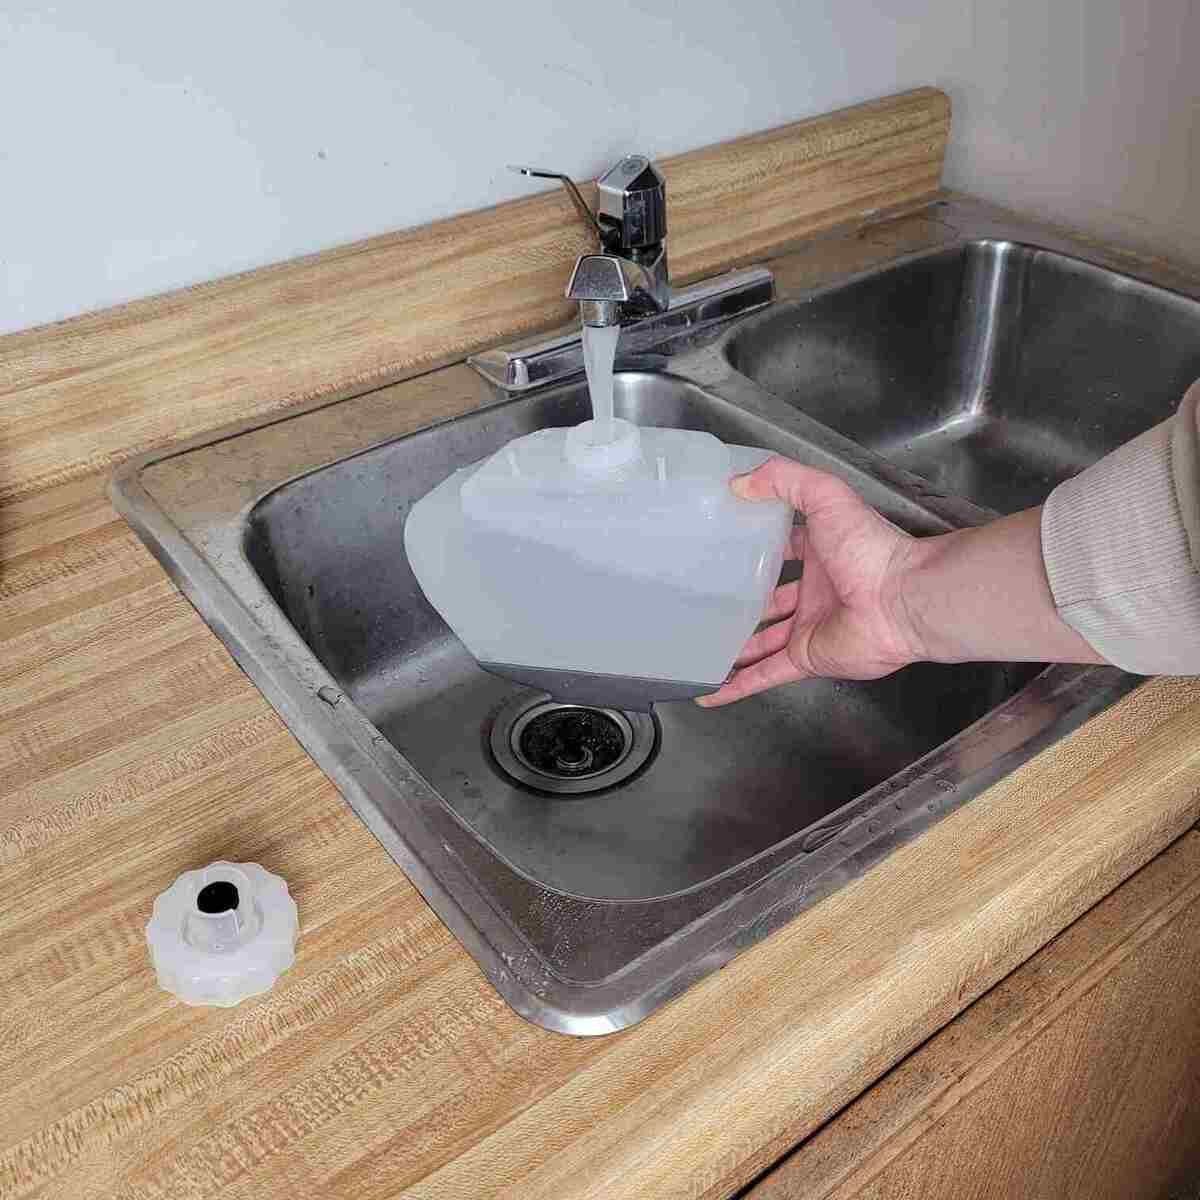 photo of a person filling up the steamer's water tank in the sink